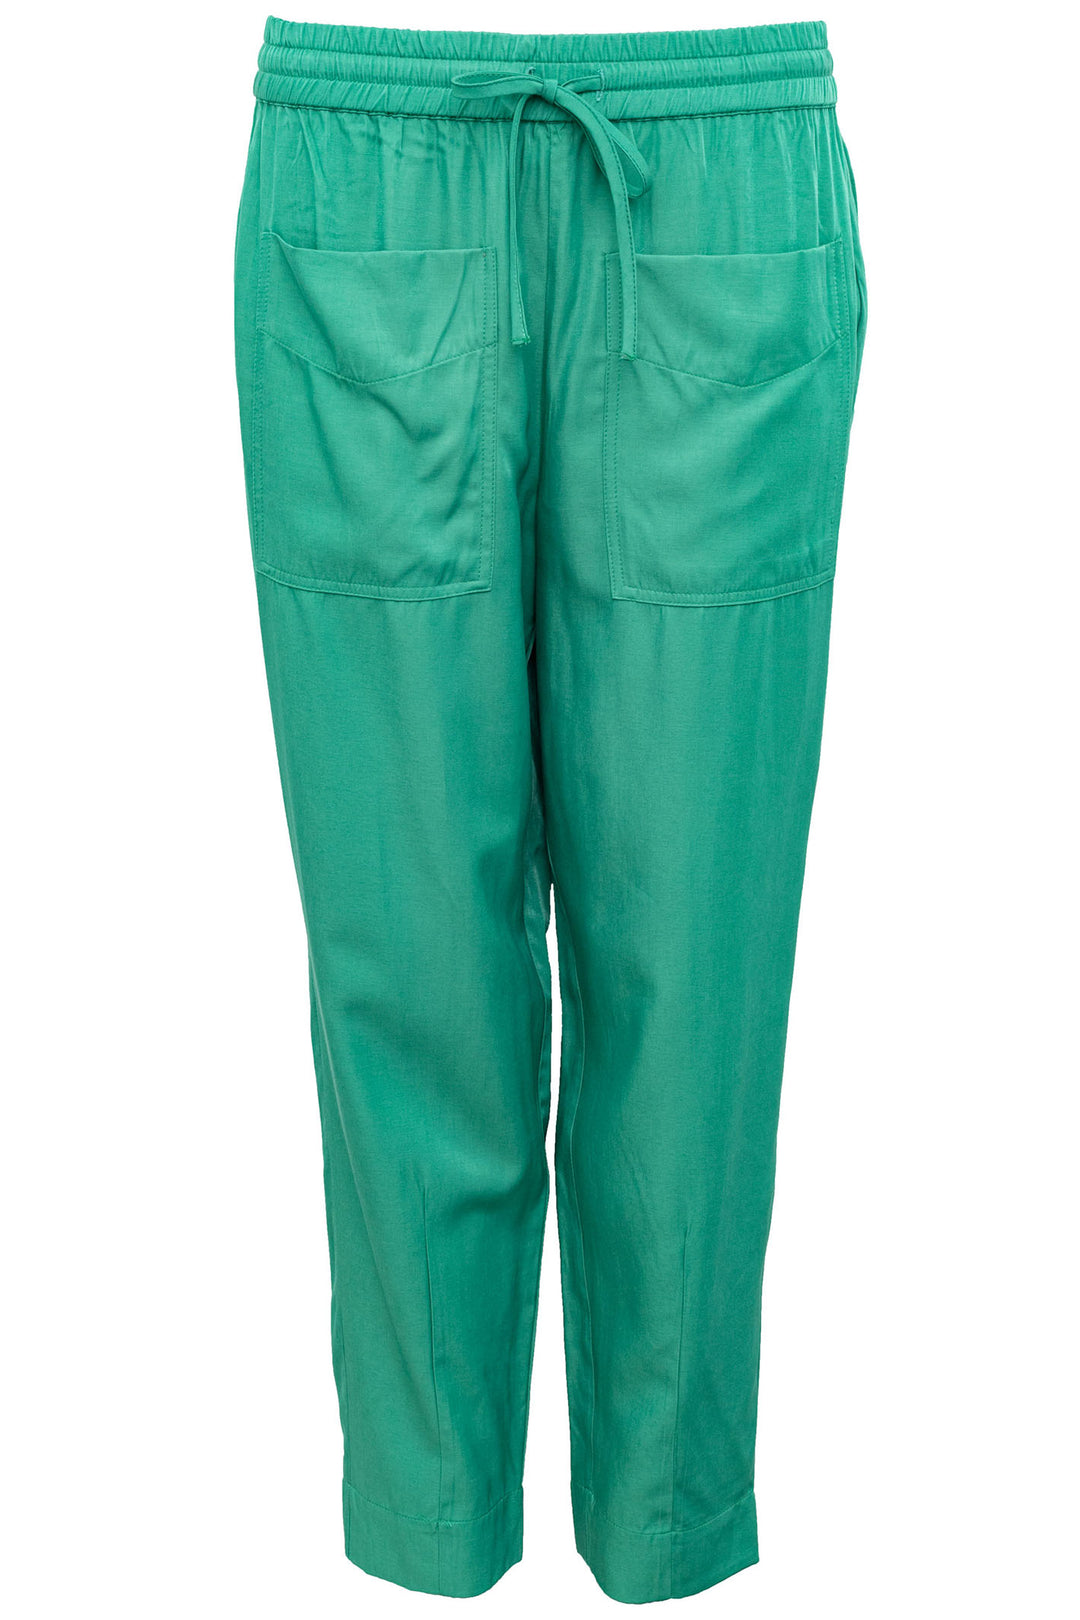 Costa Mani 2401417 Green Wanna Pull-On Trousers - Experience Boutique